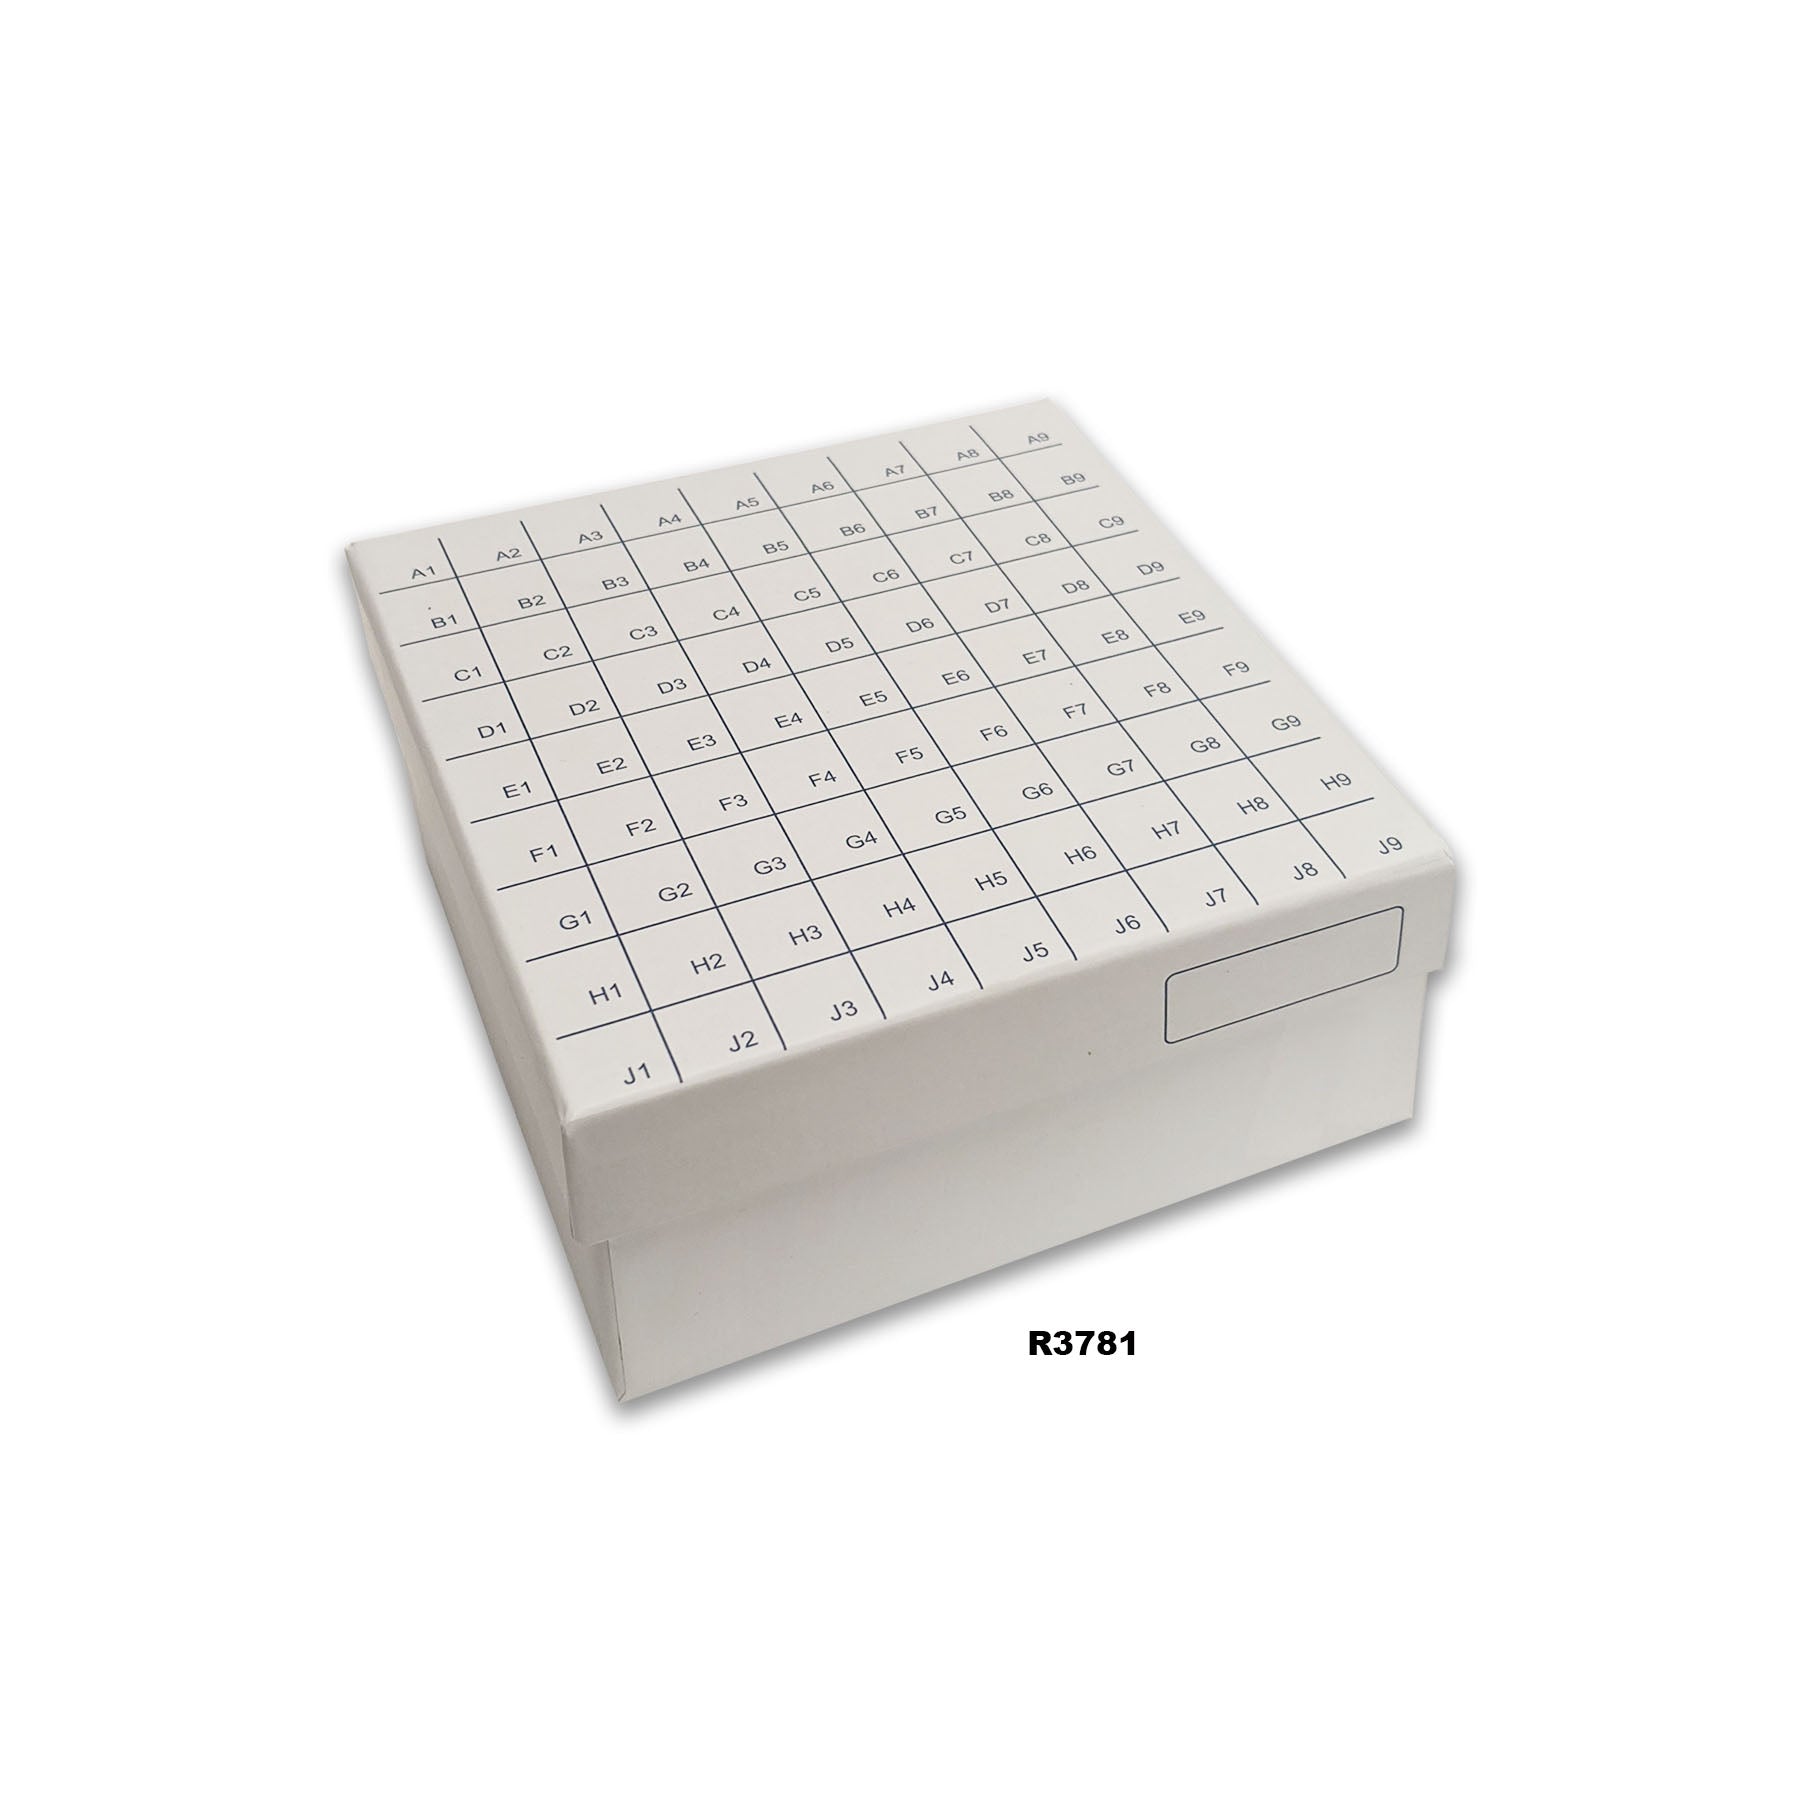 MTC Bio R3781, Fliptop Carboard Freezer Box with Attached Hinged Lid, 81-Place, White, 50/Cs